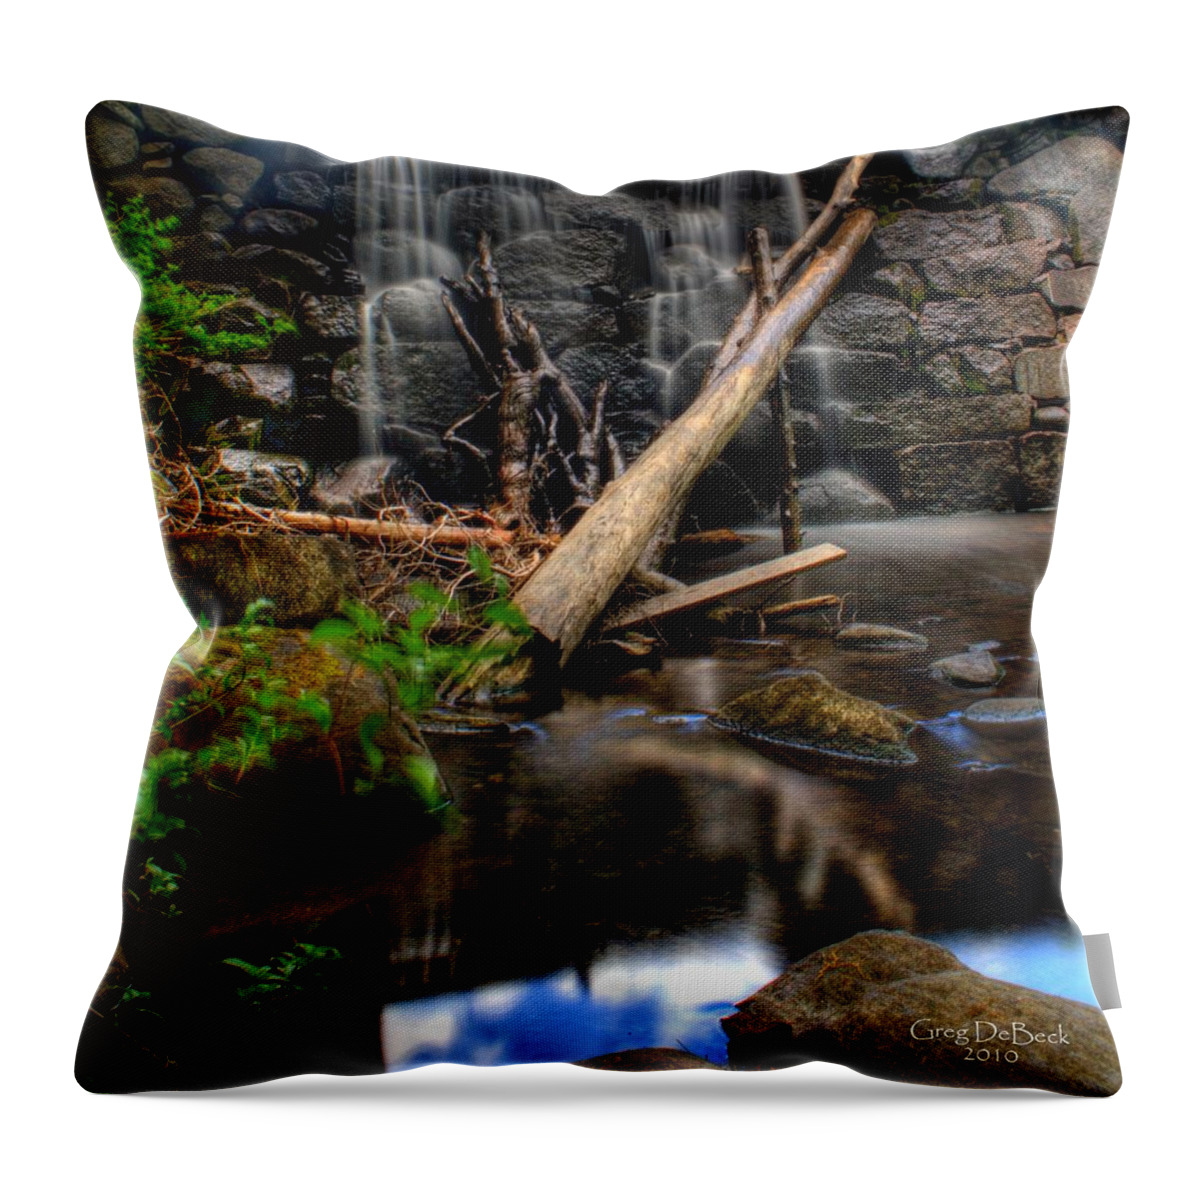 Hdr Throw Pillow featuring the photograph Holding Back by Greg DeBeck